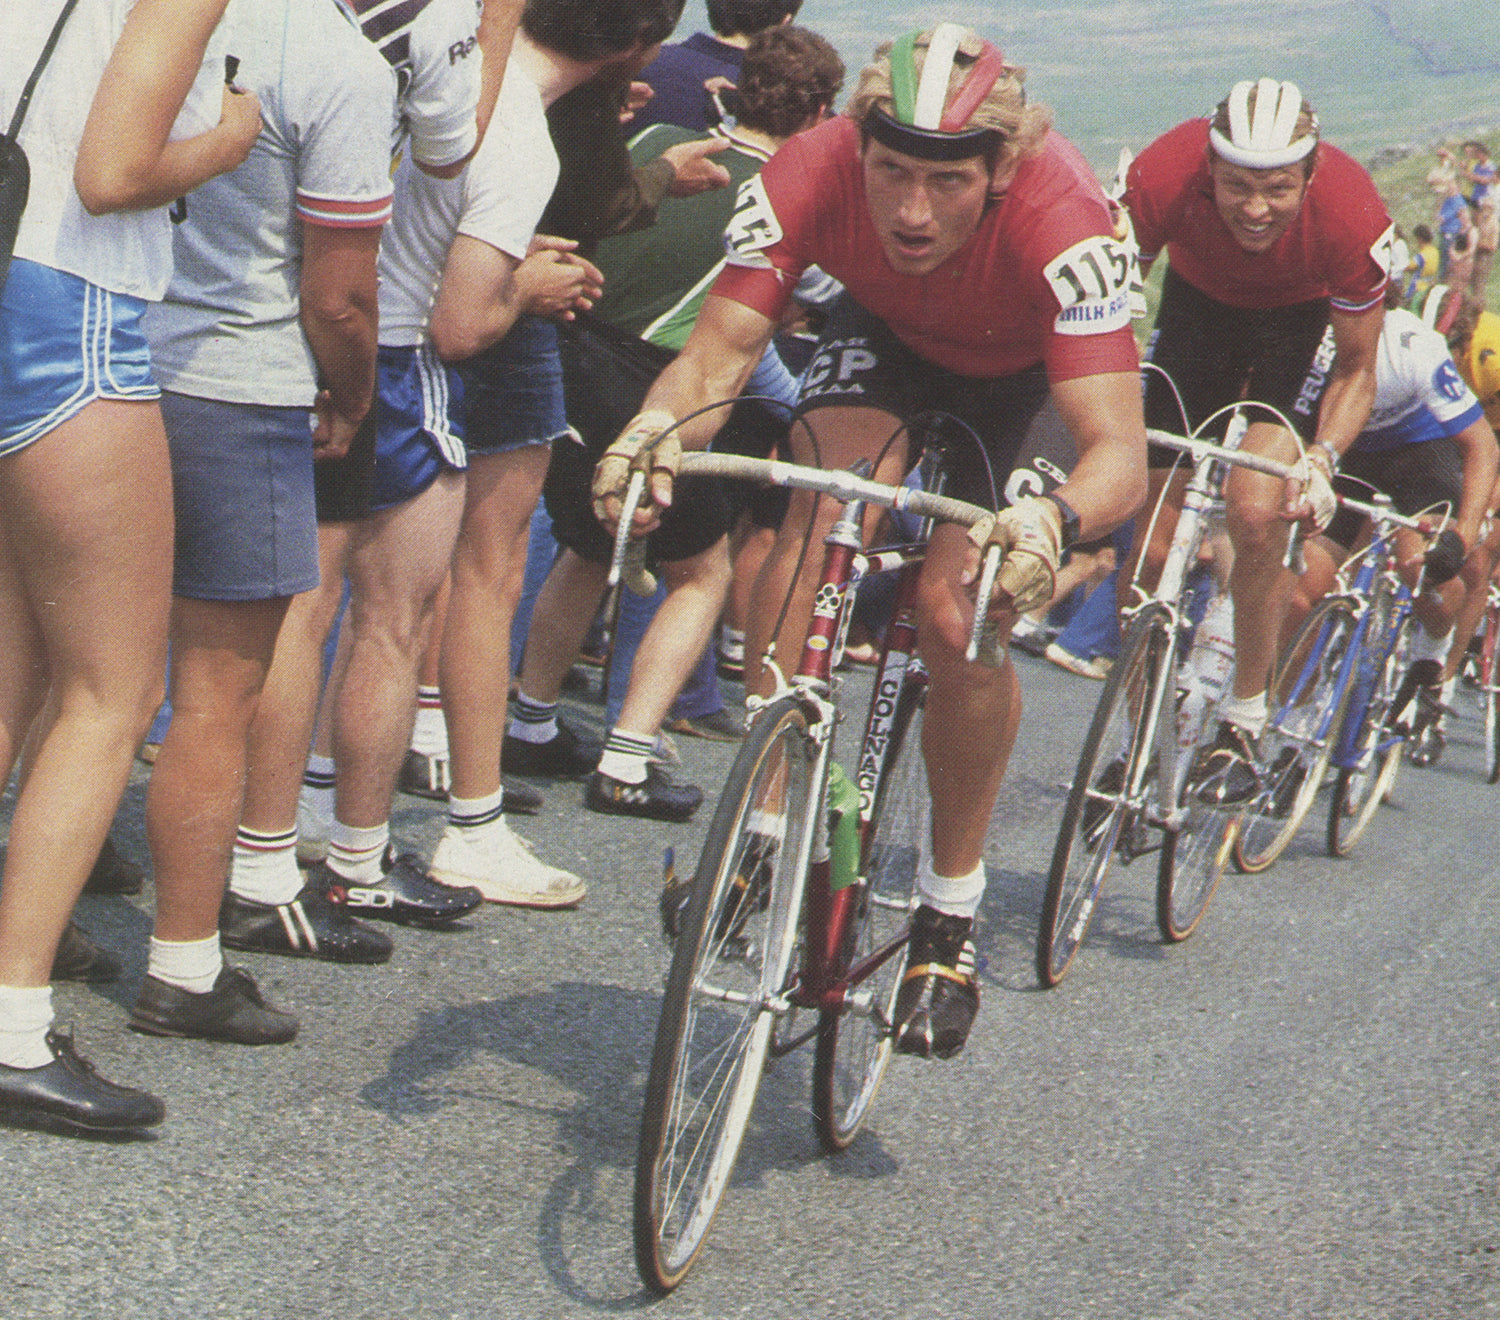 Milk Race, 1983.  A rather common sight in the 1980s was that of the USSR cycling team on the front of the bunch aboard their colour coordinated Colnago bicycles.